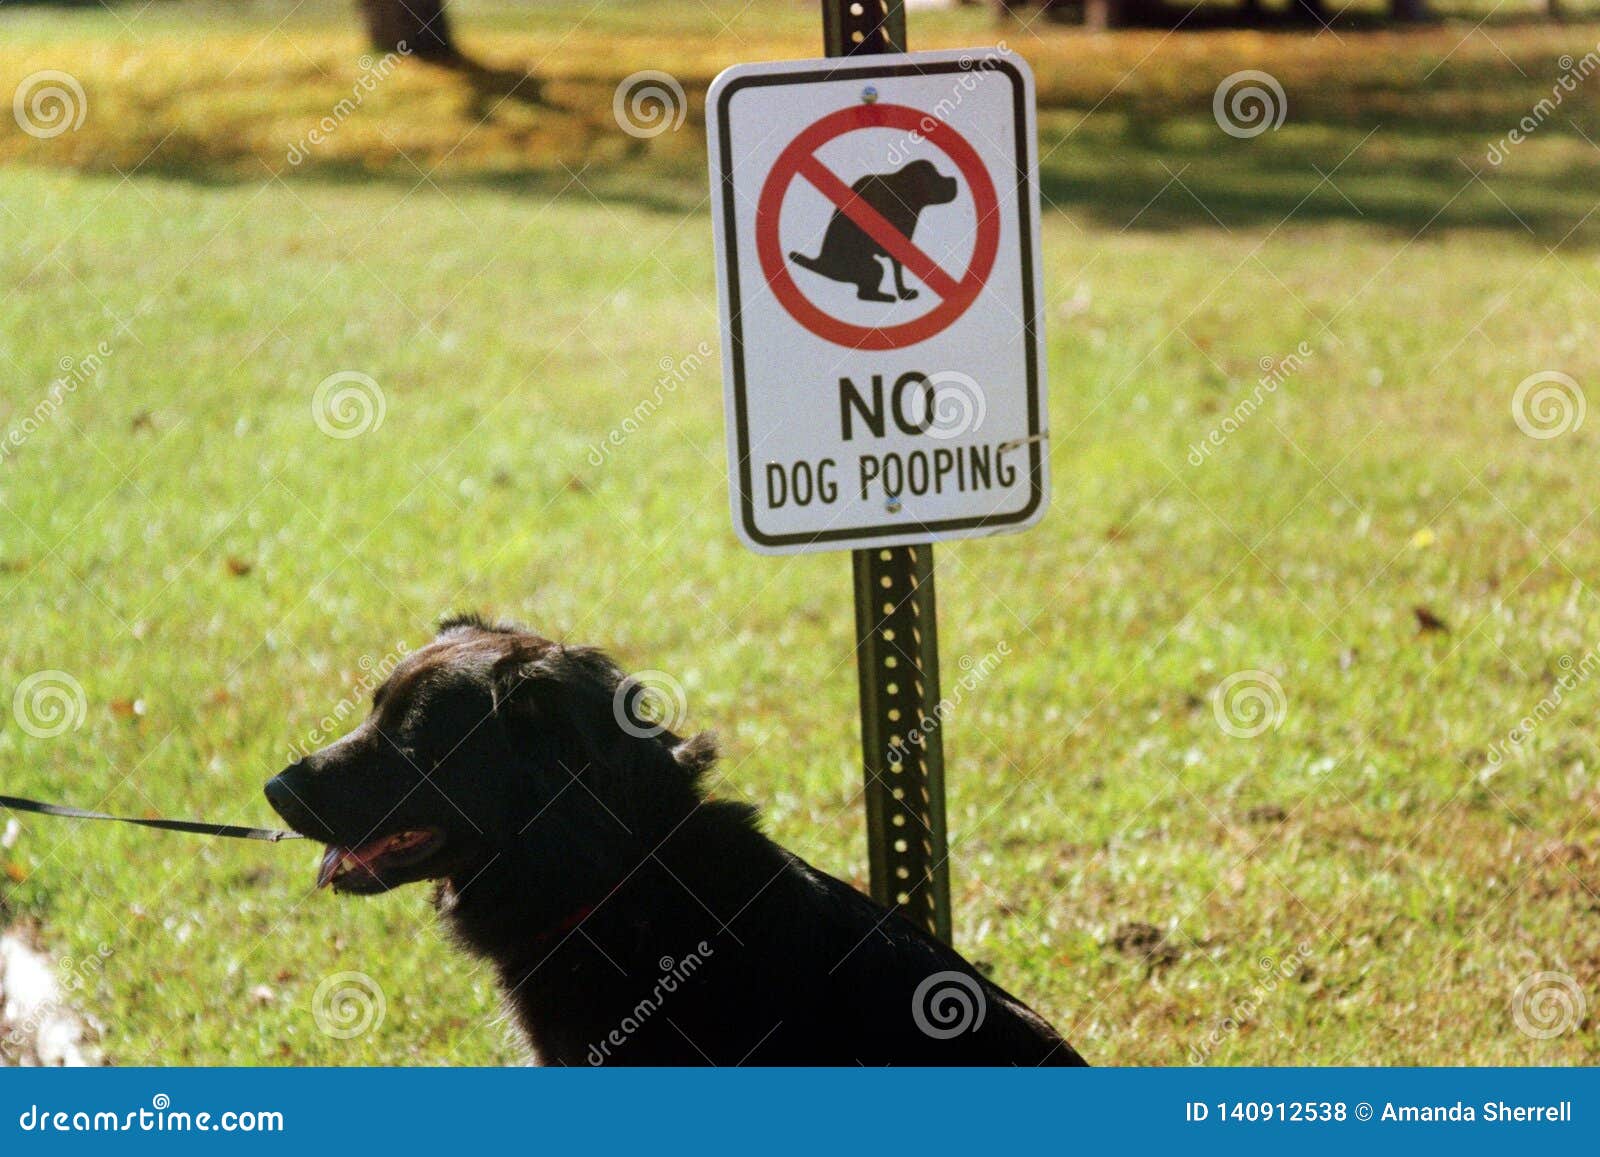 No Dogs Allowed stock photo. Image of gets, snapped - 140912538